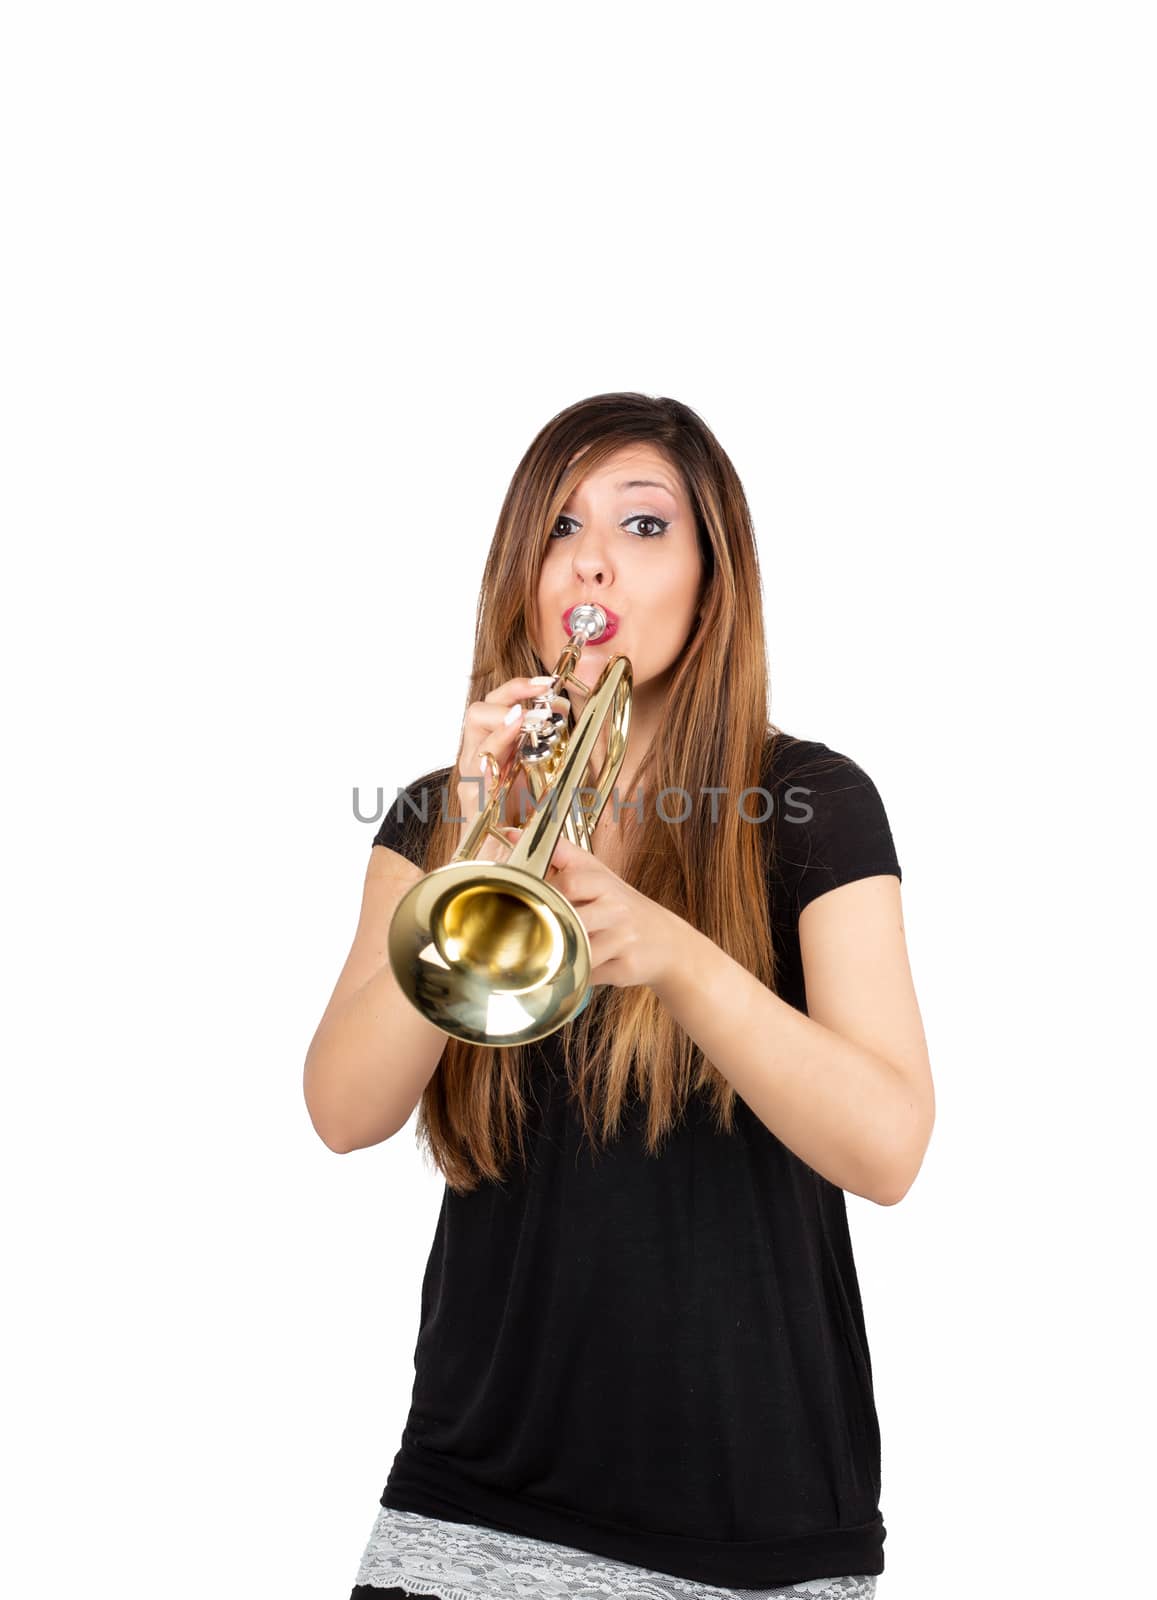 Funny woman holding trumpet isolated on withe background